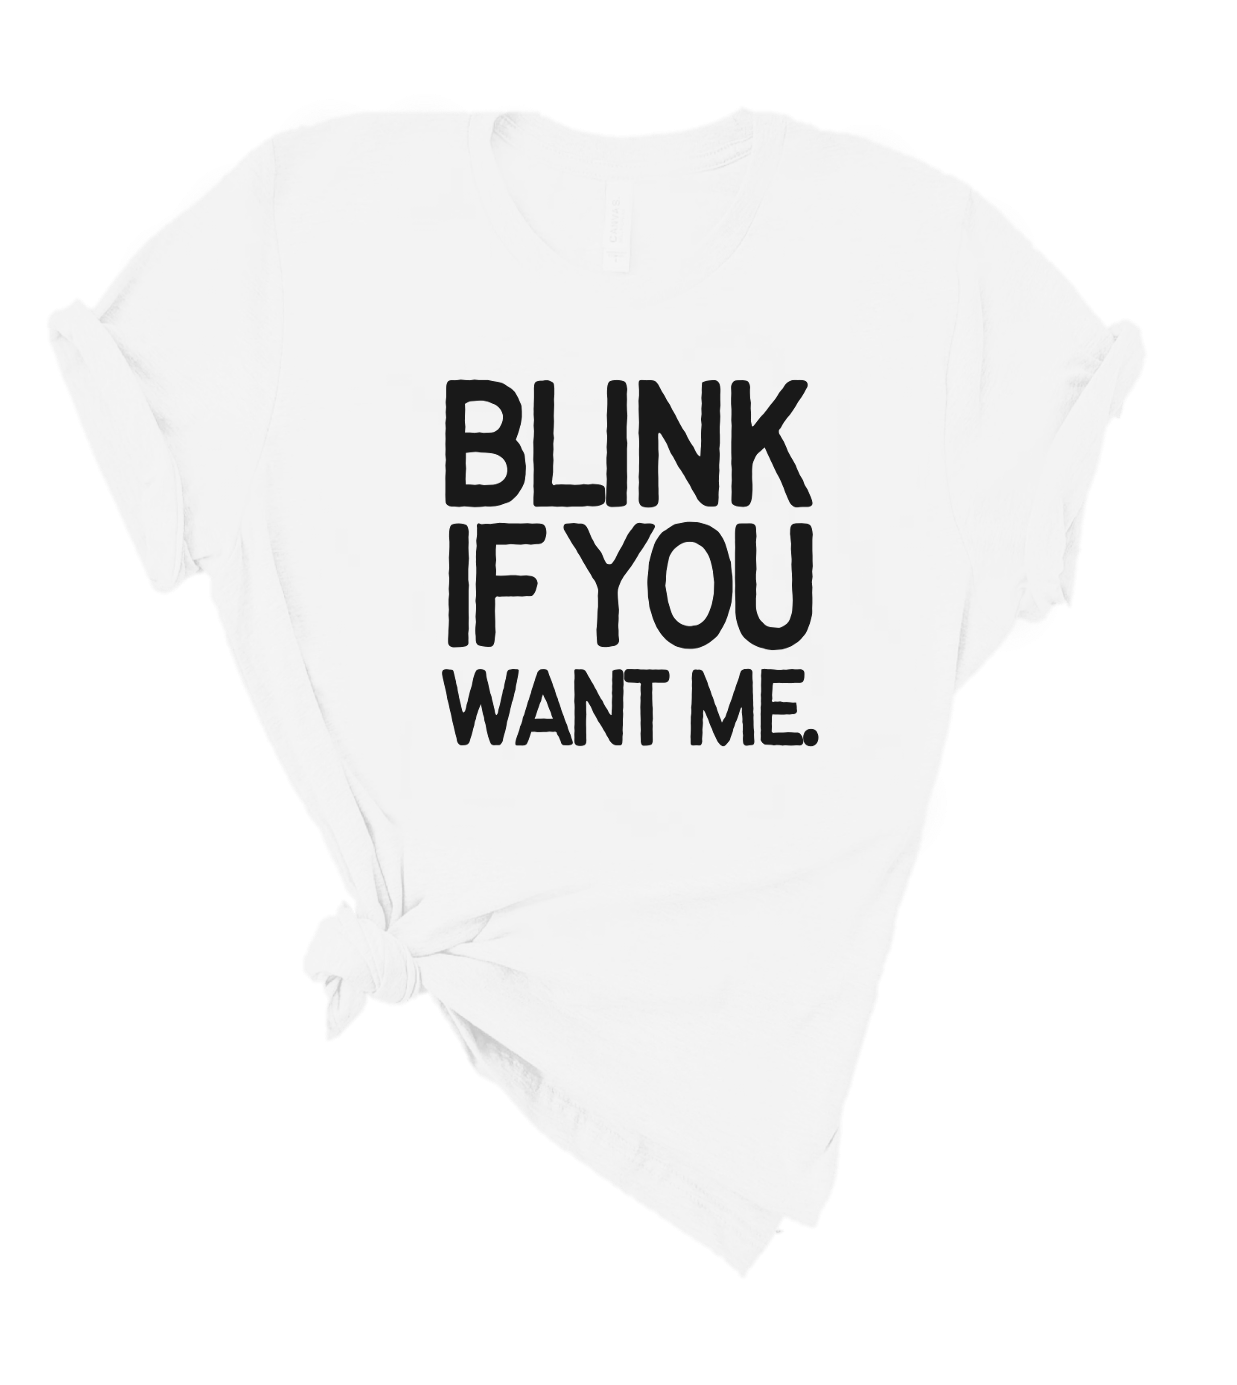 BLINK IF YOU WANT ME.